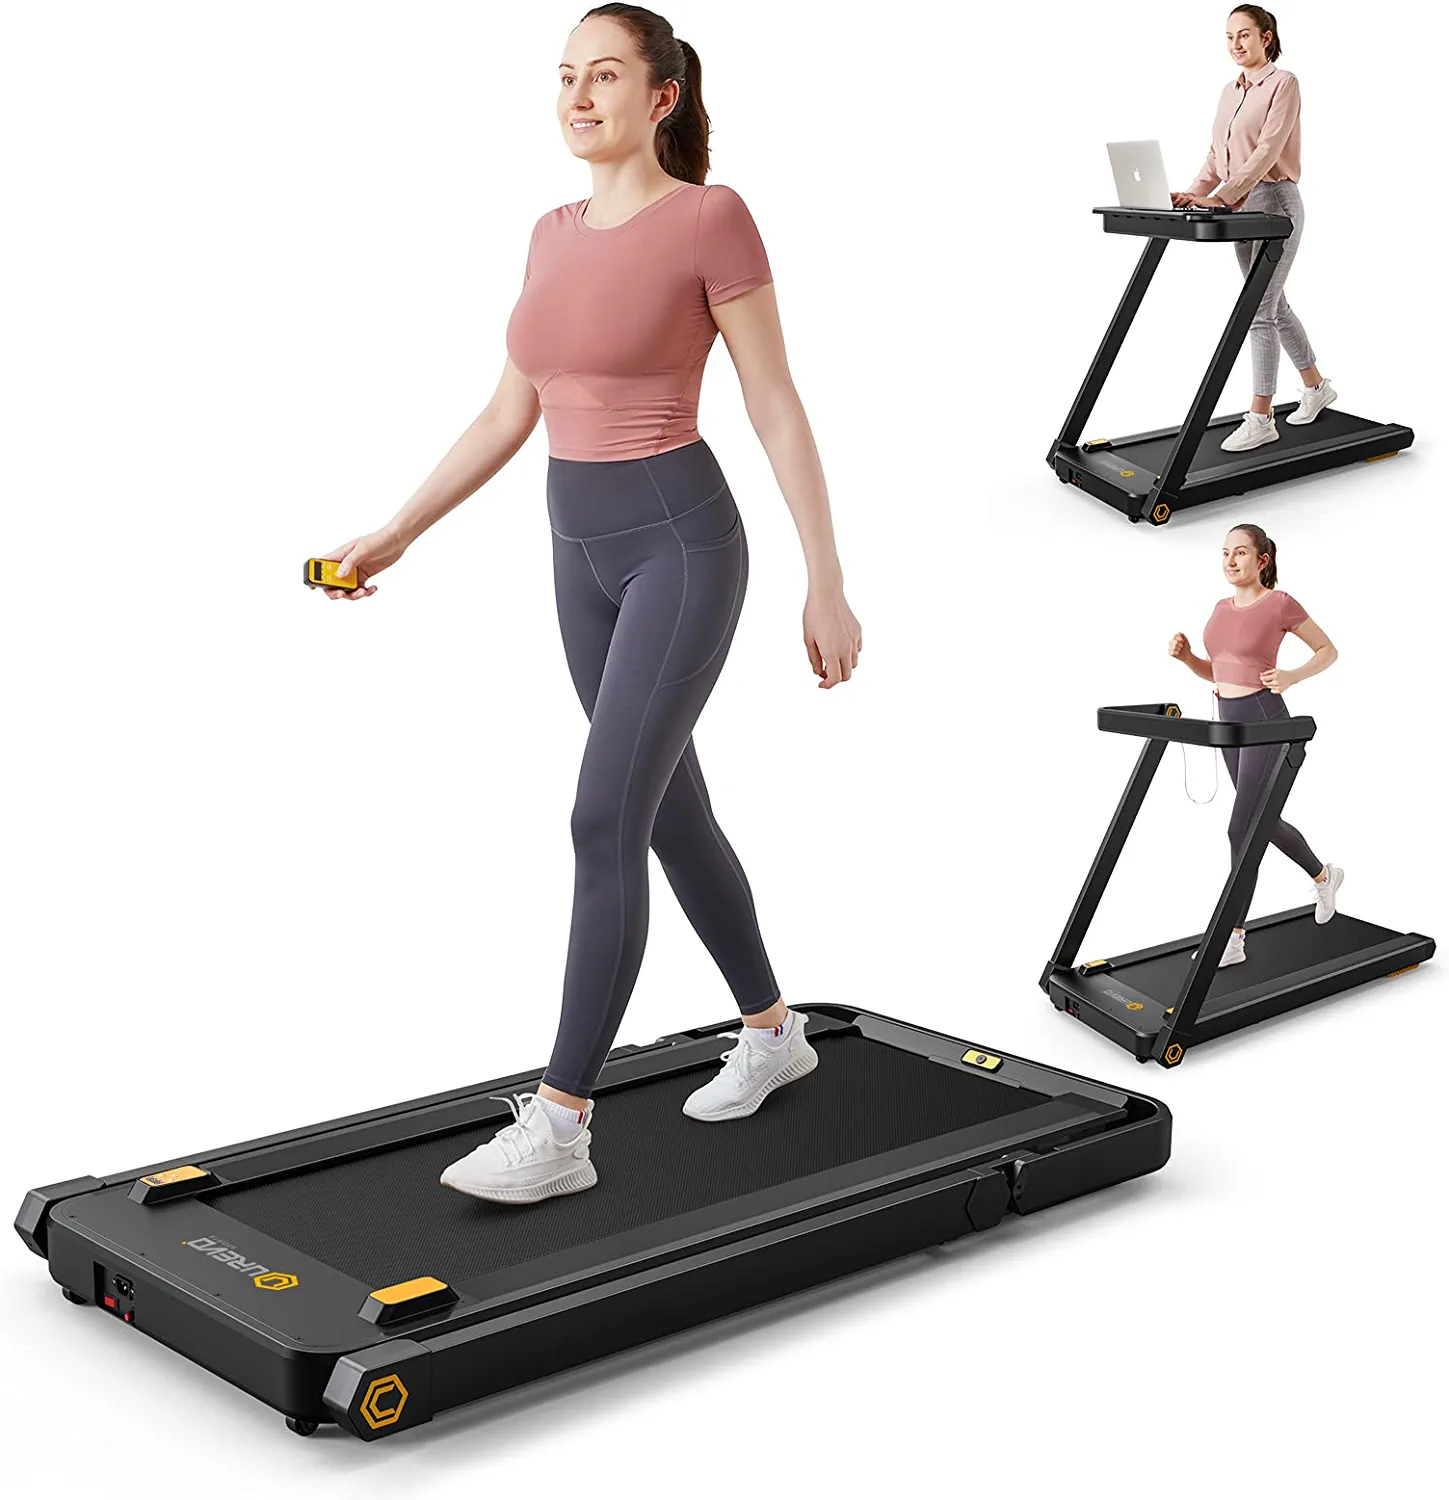 UREVO 3-in-1 Foldable Treadmill with Removable Desk